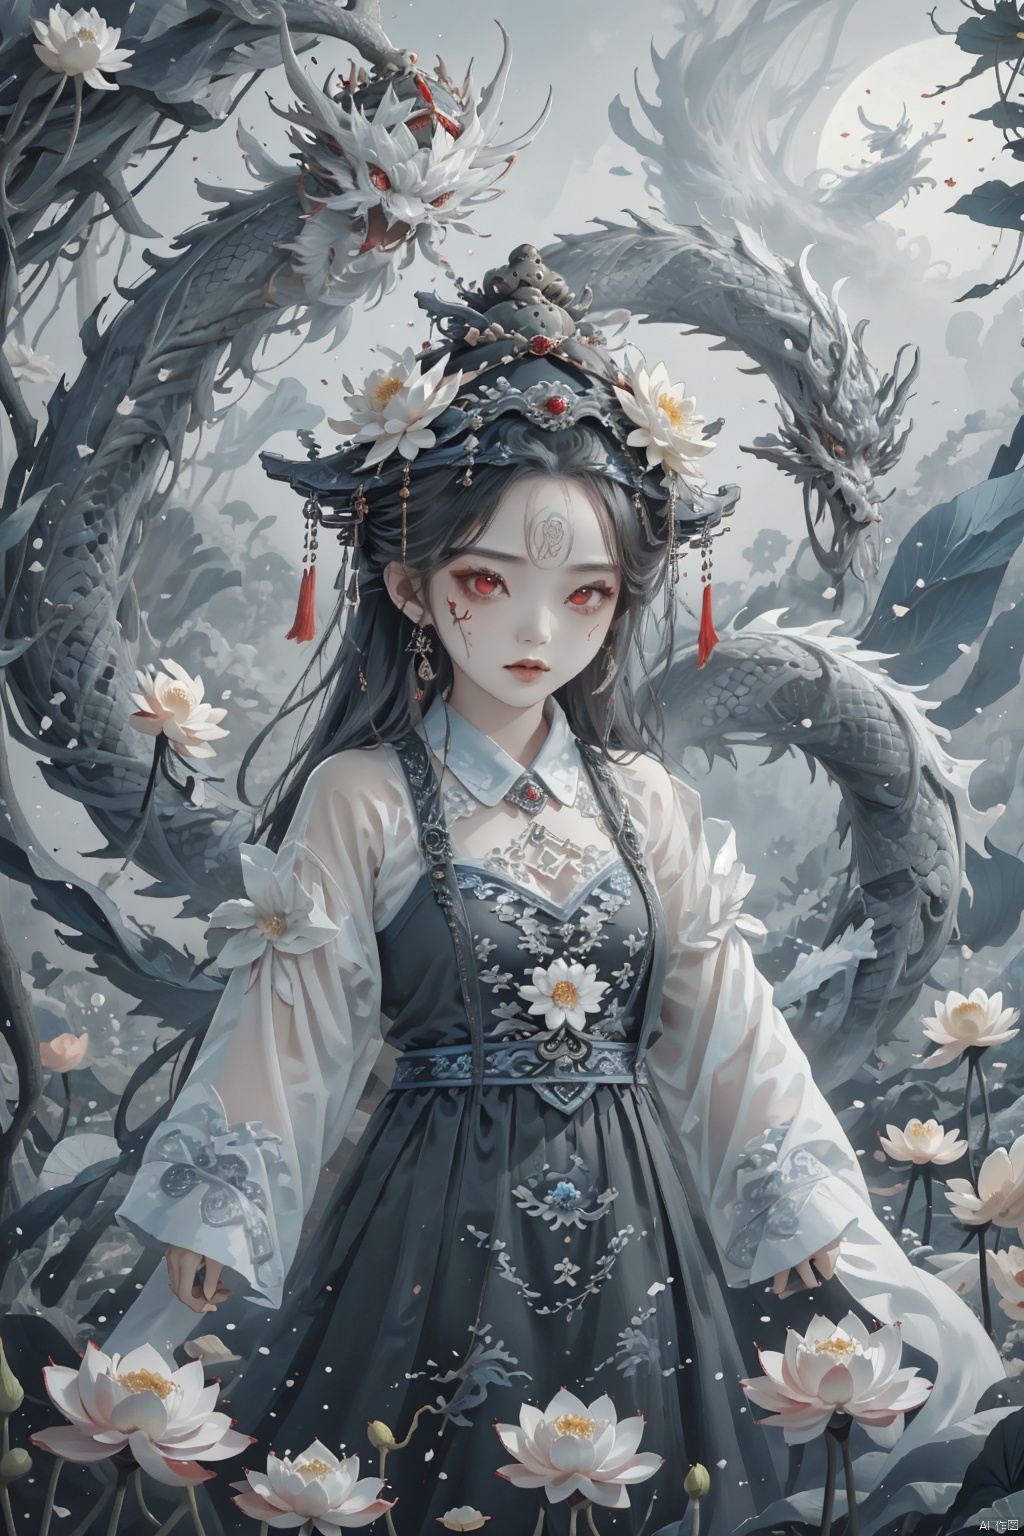  ((masterpiece)),((best quality)),8k,high detailed,ultra-detailed,upper body,((huangfu paper)),1girl,jiangshigirl costume,huangfu,(blood-red eyes)),painted face,with glowing eyes,floats above a field of lotus flowers. The surreal scene blends elements of traditional folklore with a fantastical dreamscape,creating an otherworldly and serene ambiance. ((floating:1.2)),(dreamlike),(lotus field),Unreal Engine rendering,exploring the intersection of dreams and the supernatural, qiuyinong, drakan_longdress_dragon crown_headdress, qzcnhorror